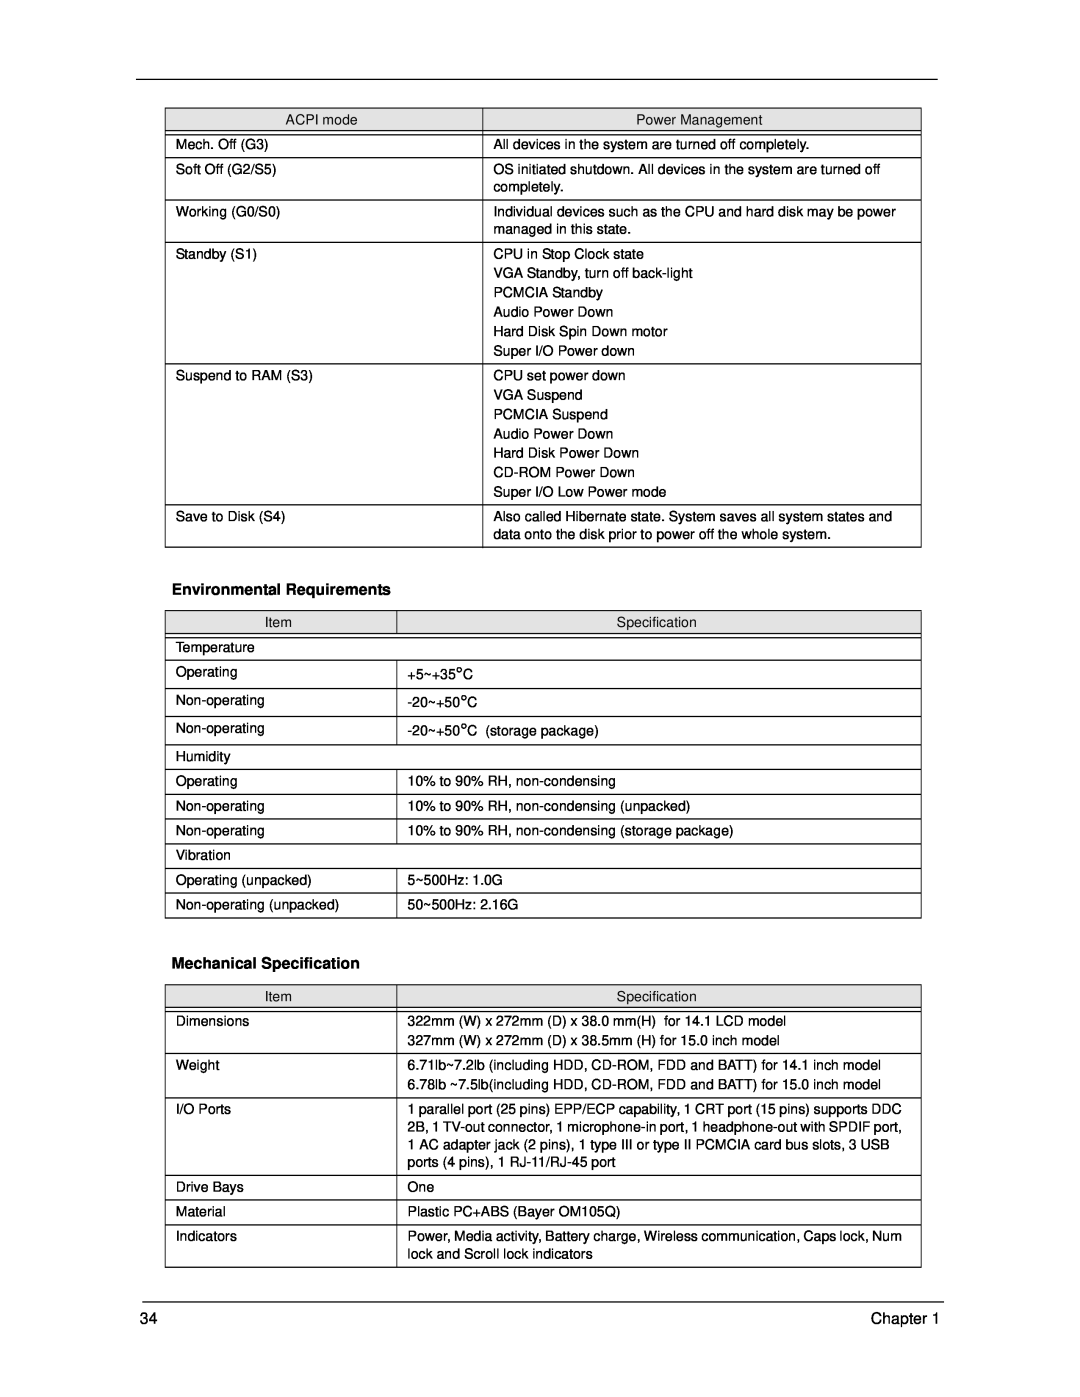 Acer 270 manual Environmental Requirements, Mechanical Specification 